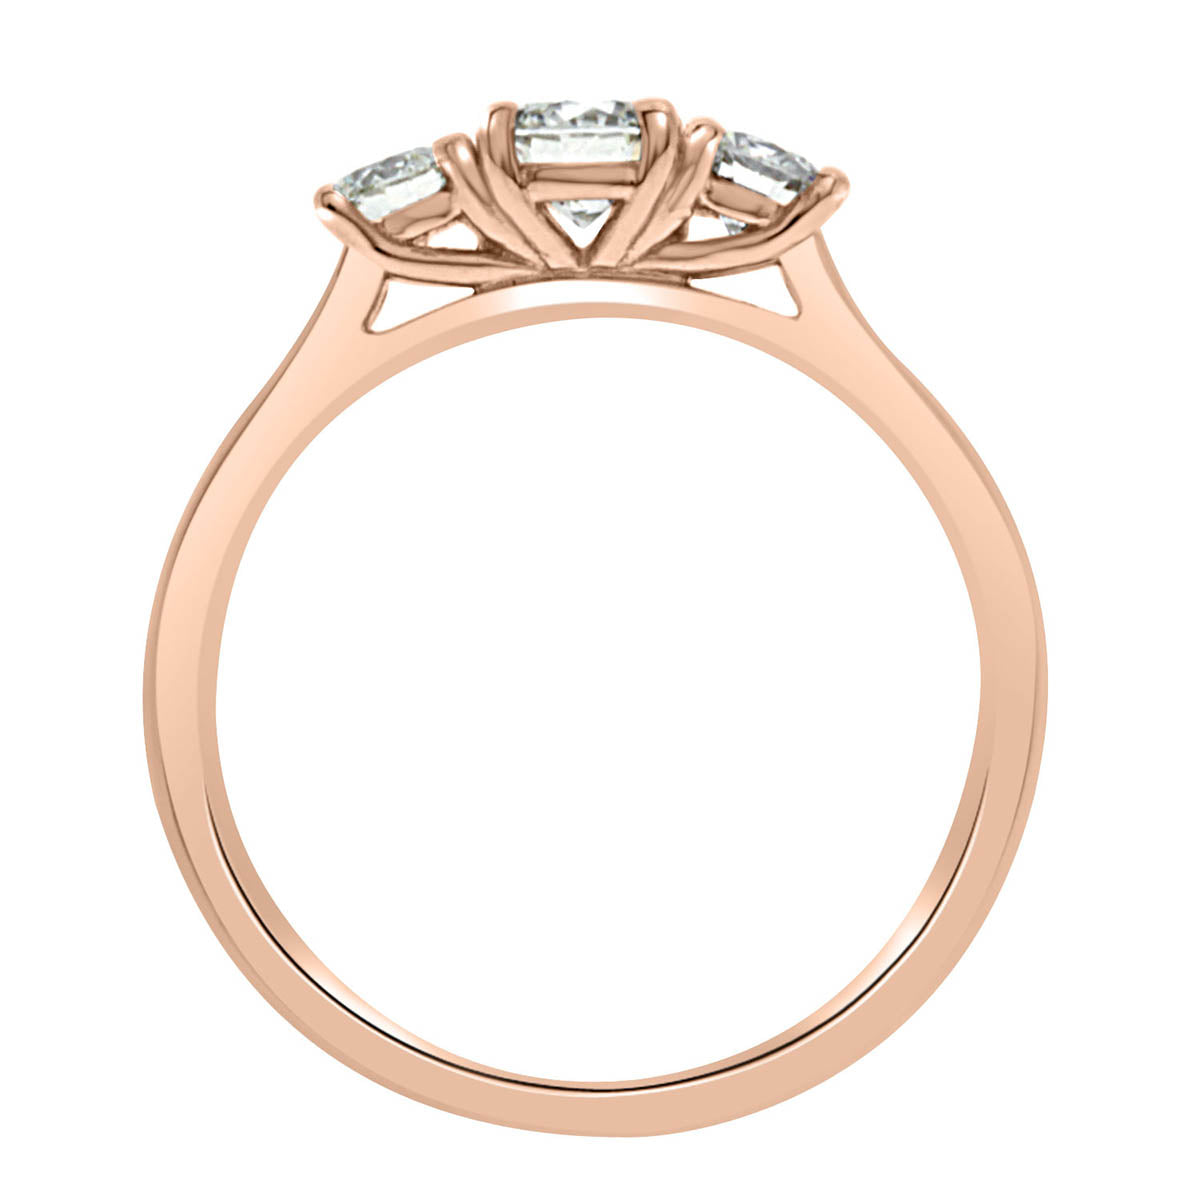 Trilogy Engagement Ring made in rose gold standing upright